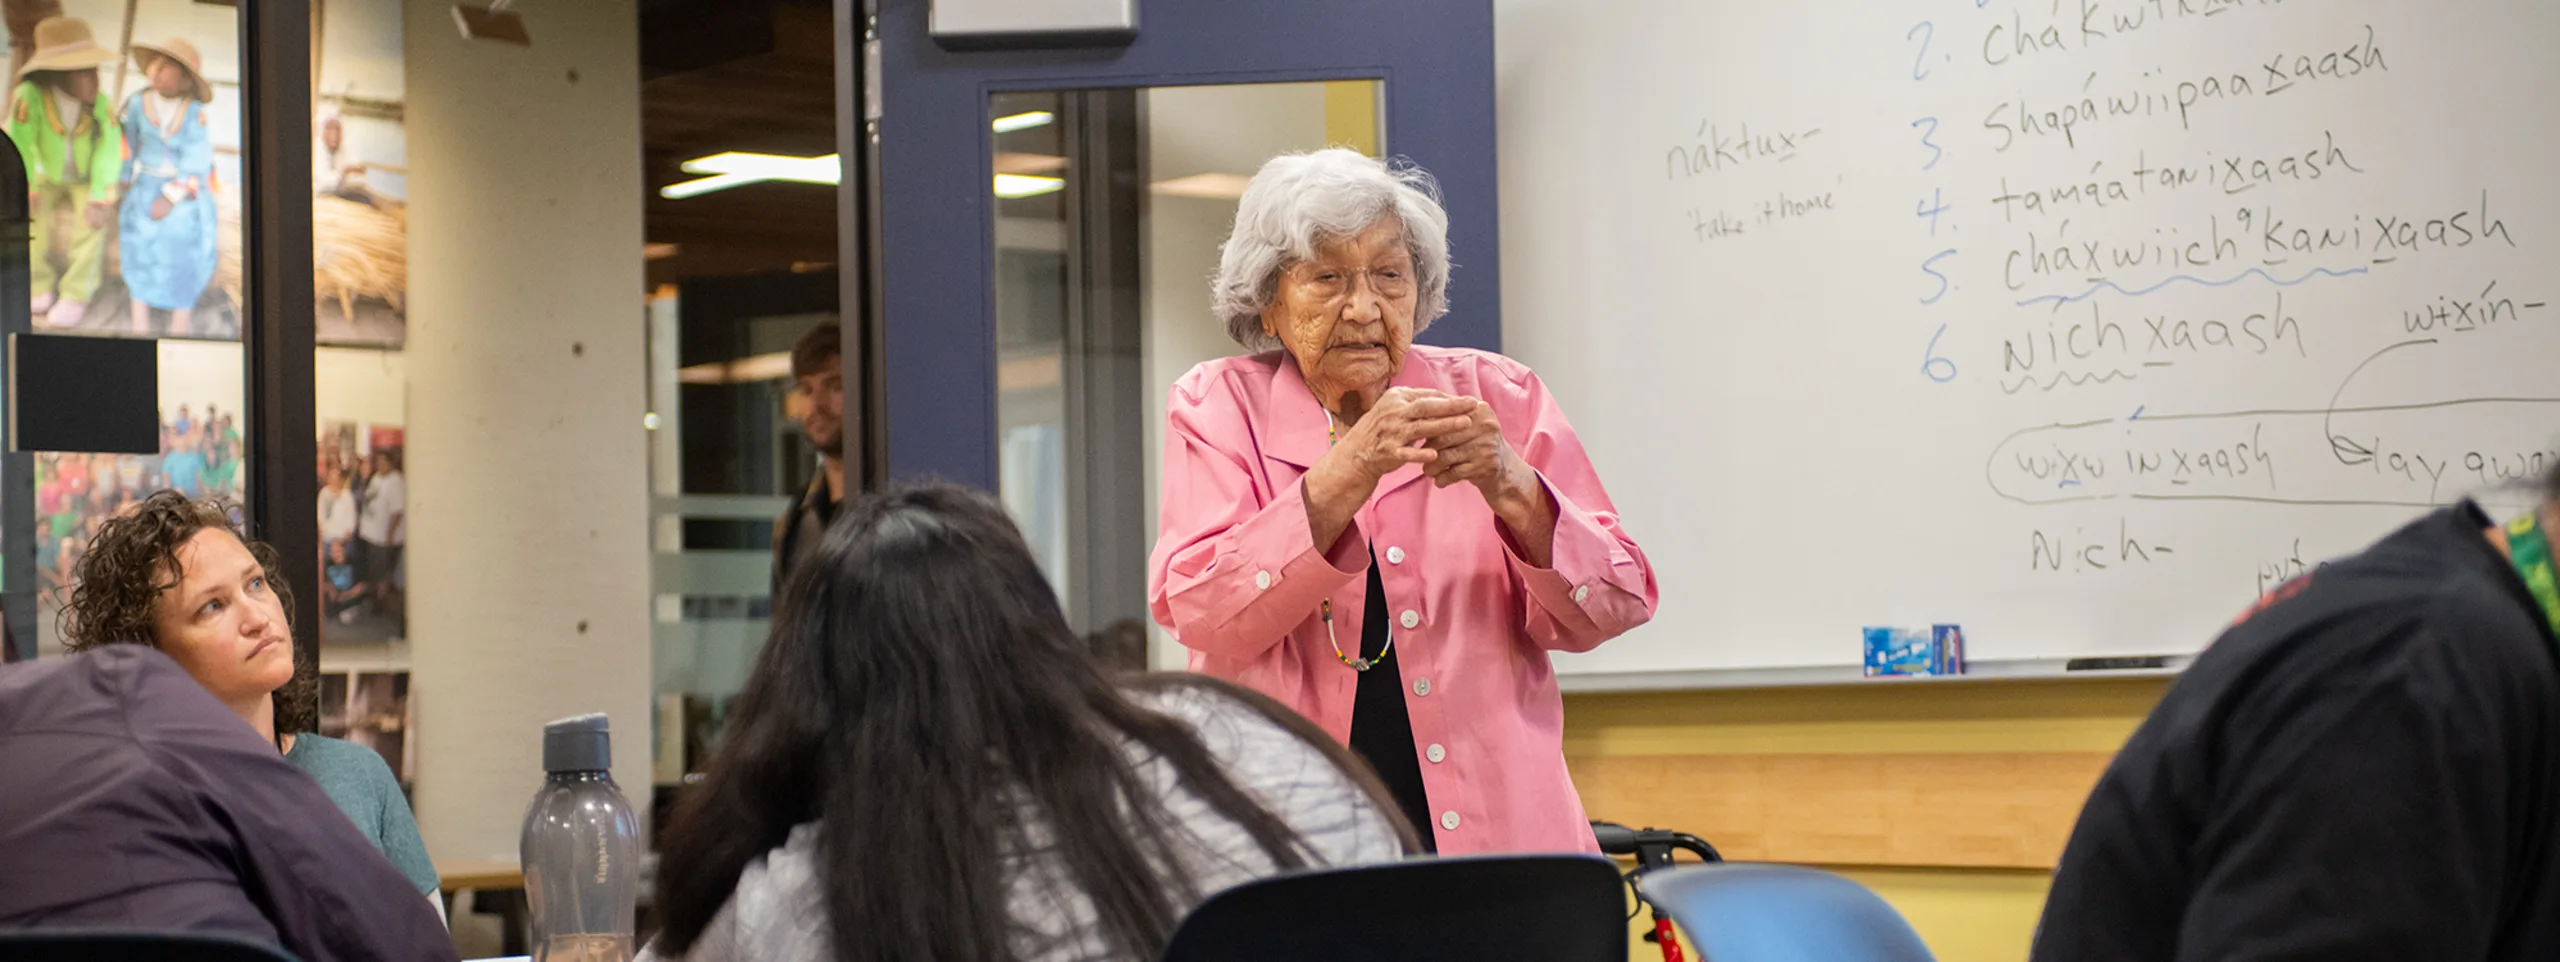 An elderly woman speaks in front of a classroom. On the whiteboard are words in an Indigenous language.